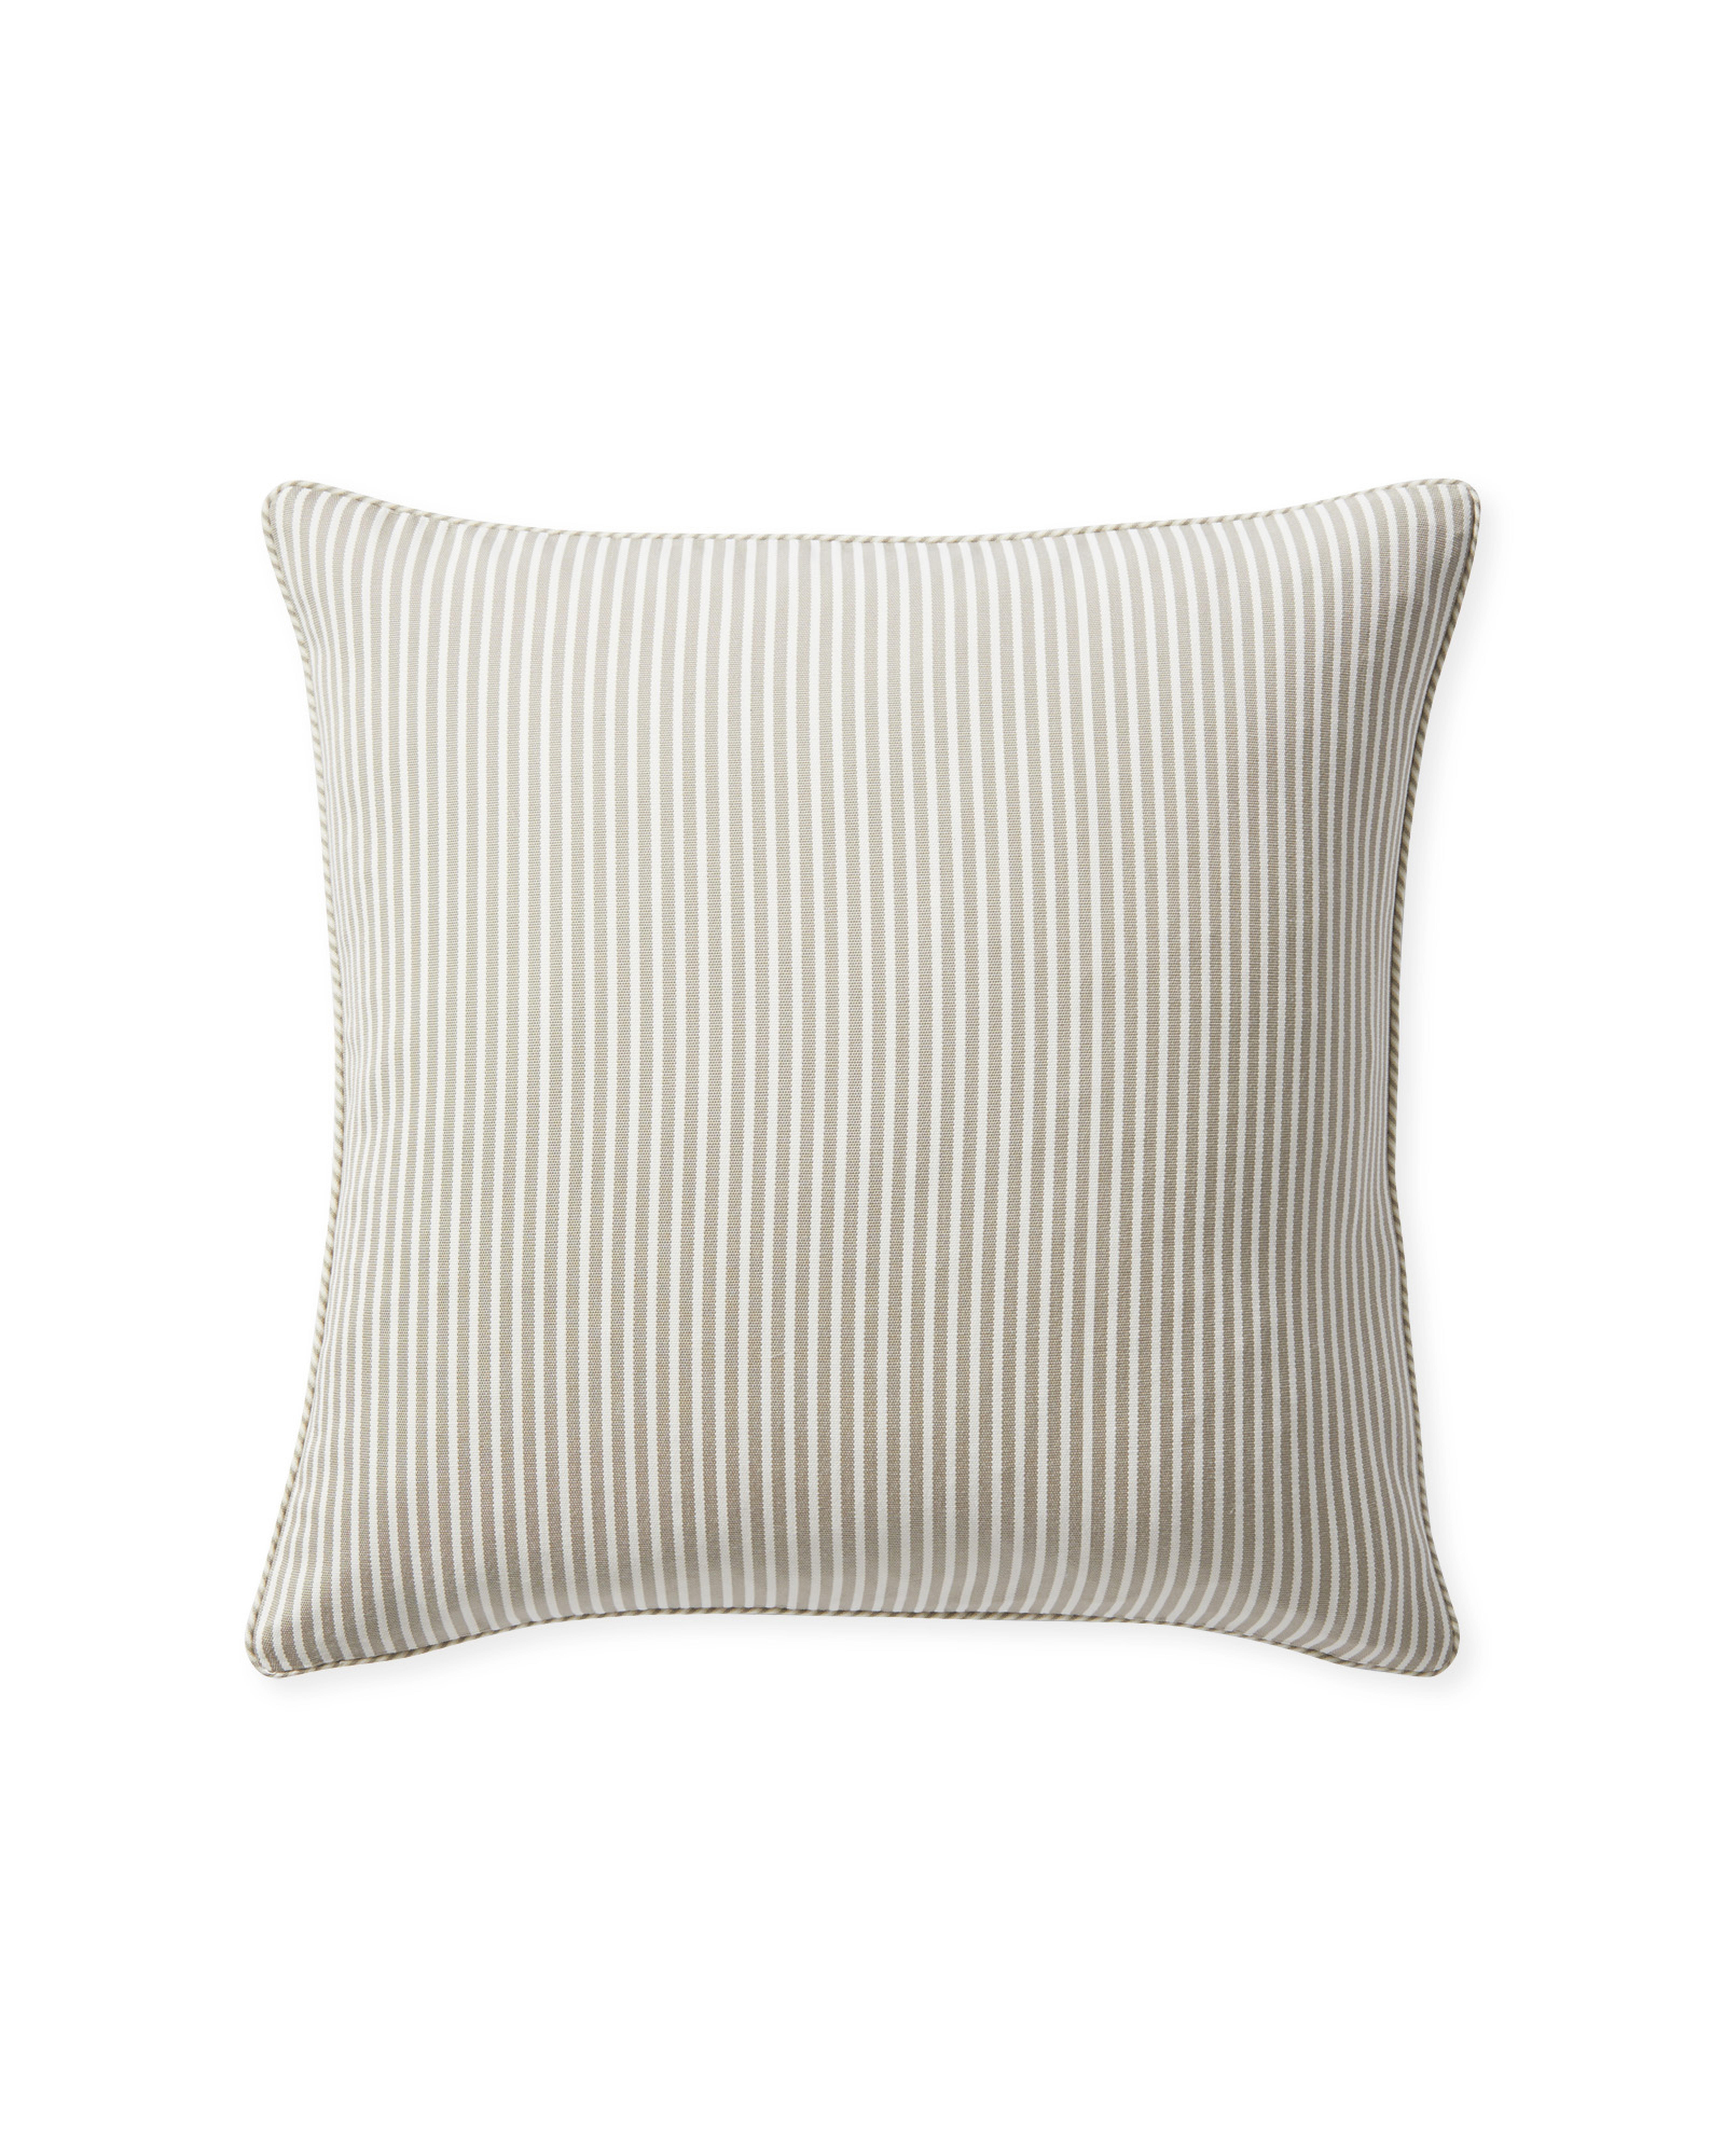 Perennials® Pinstripe Outdoor Pillow Cover - Serena and Lily